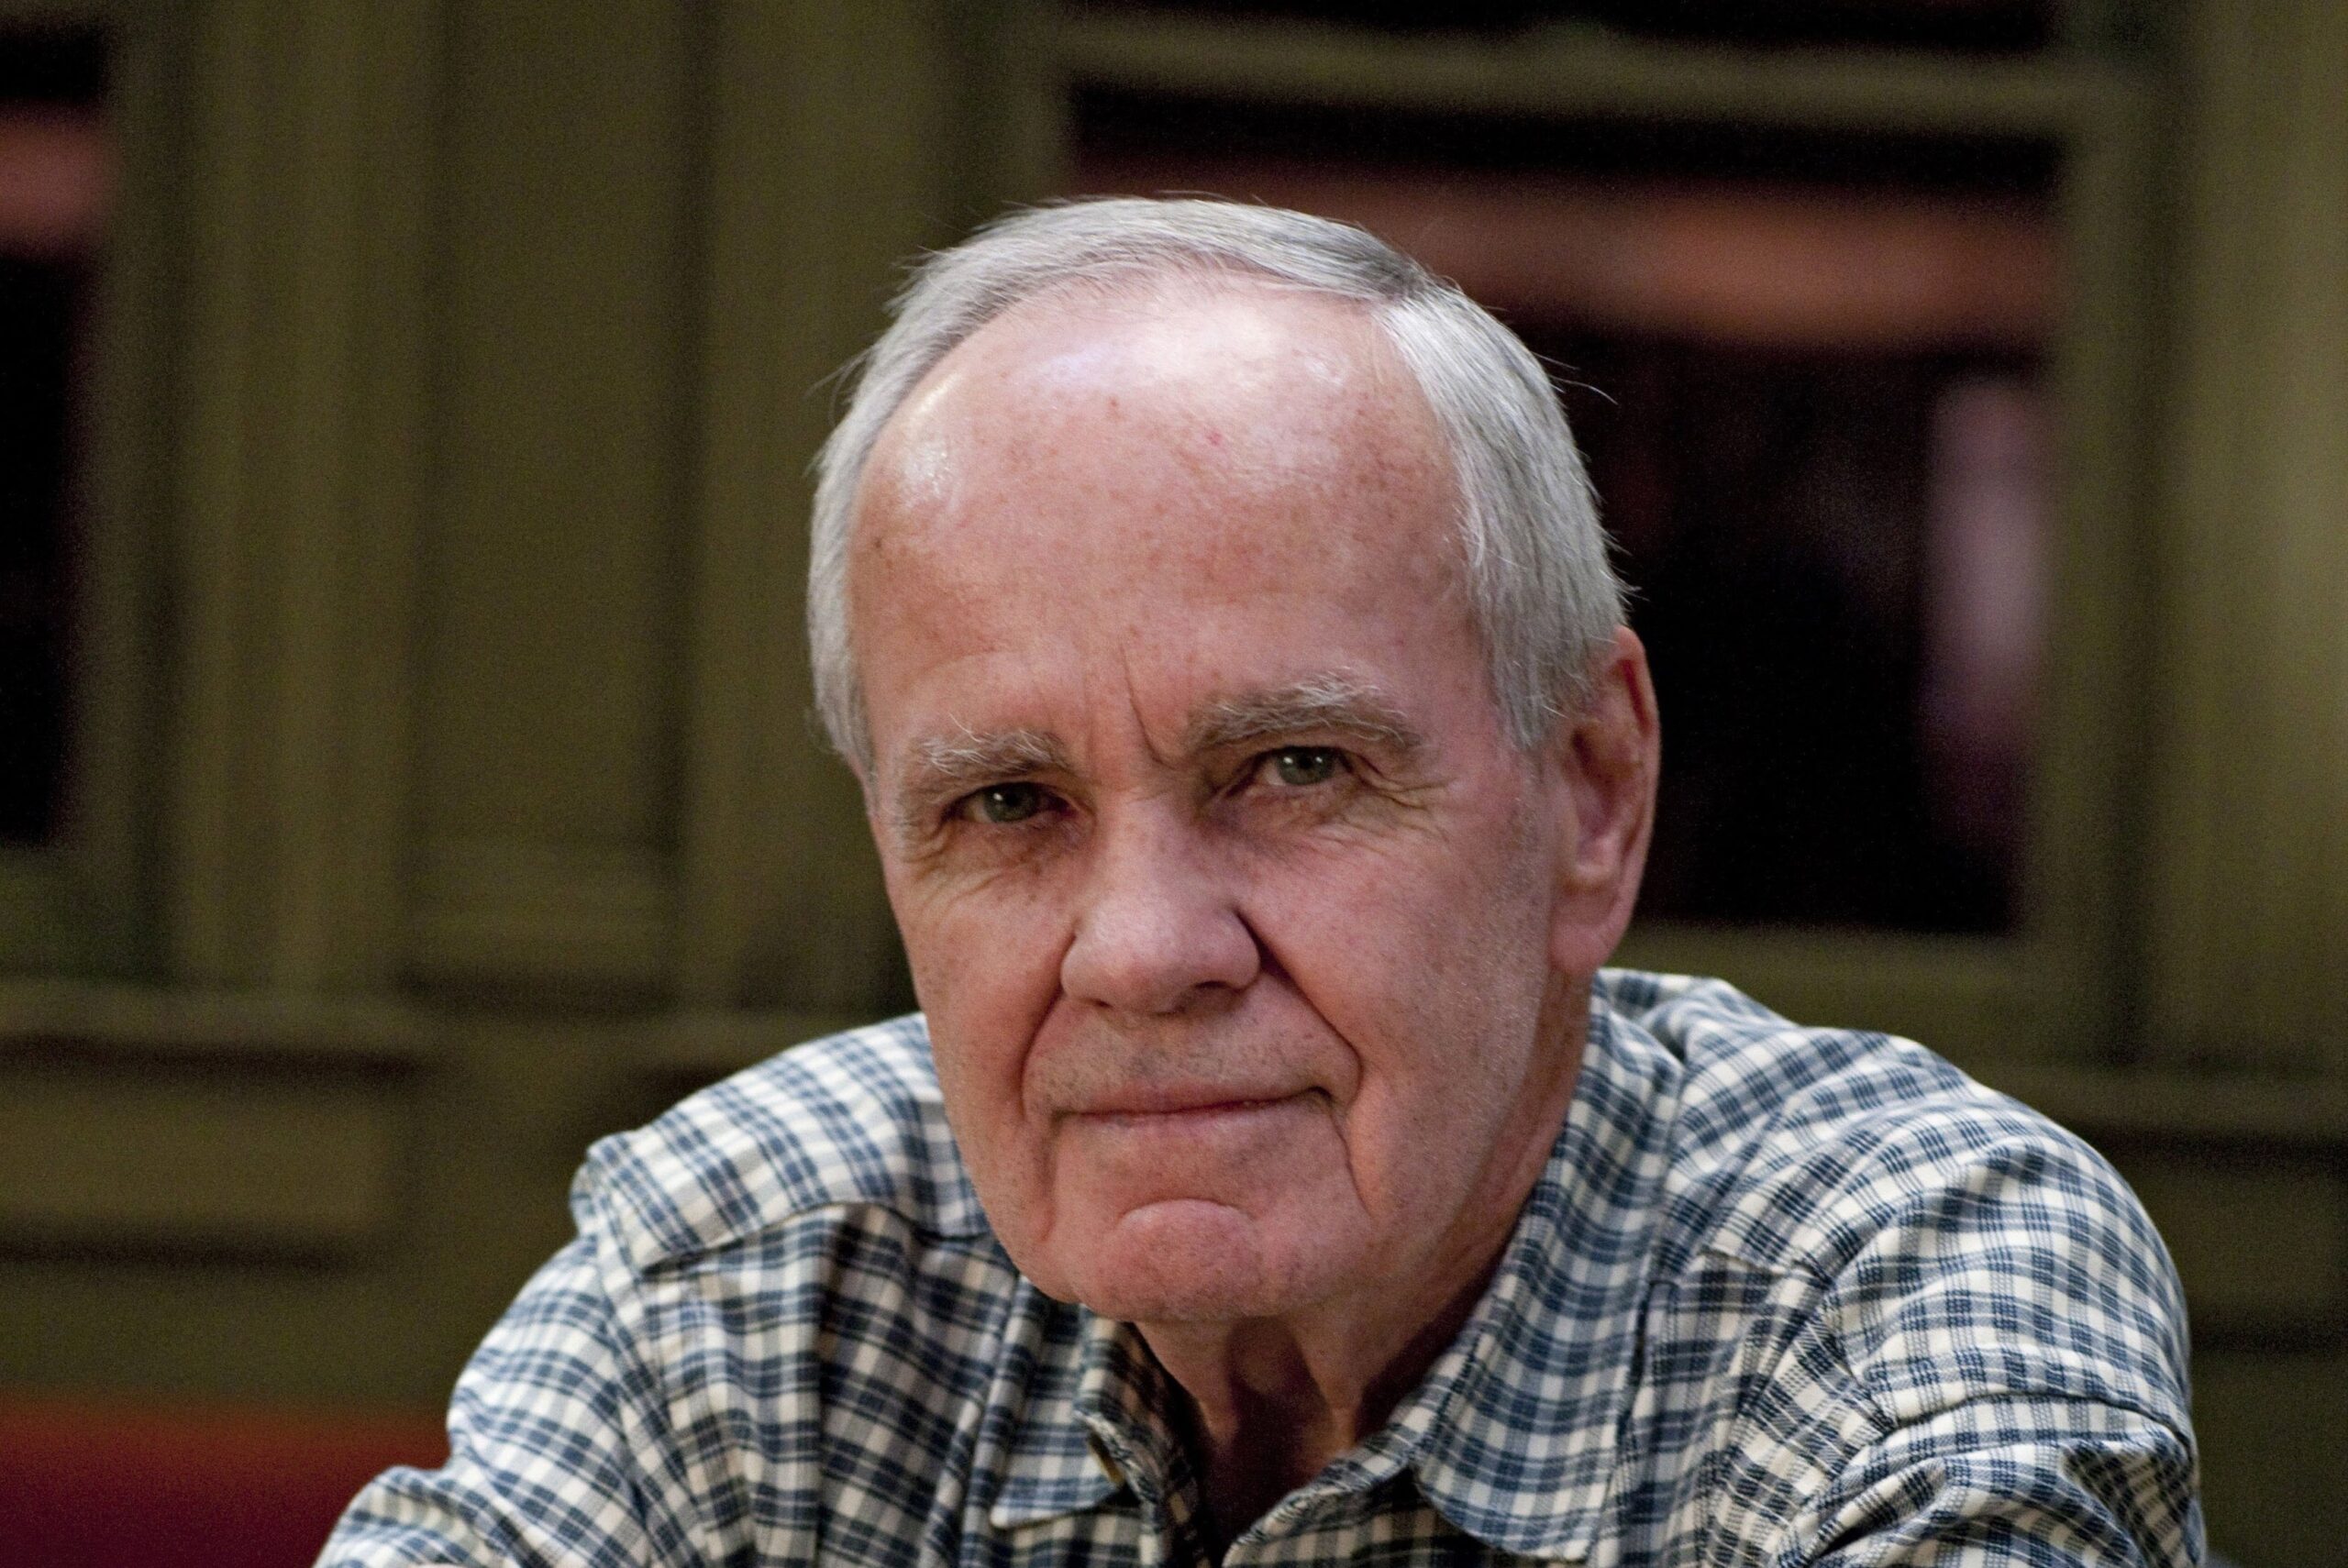 Cormac McCarthy, author of No Country for Old Men, has died.